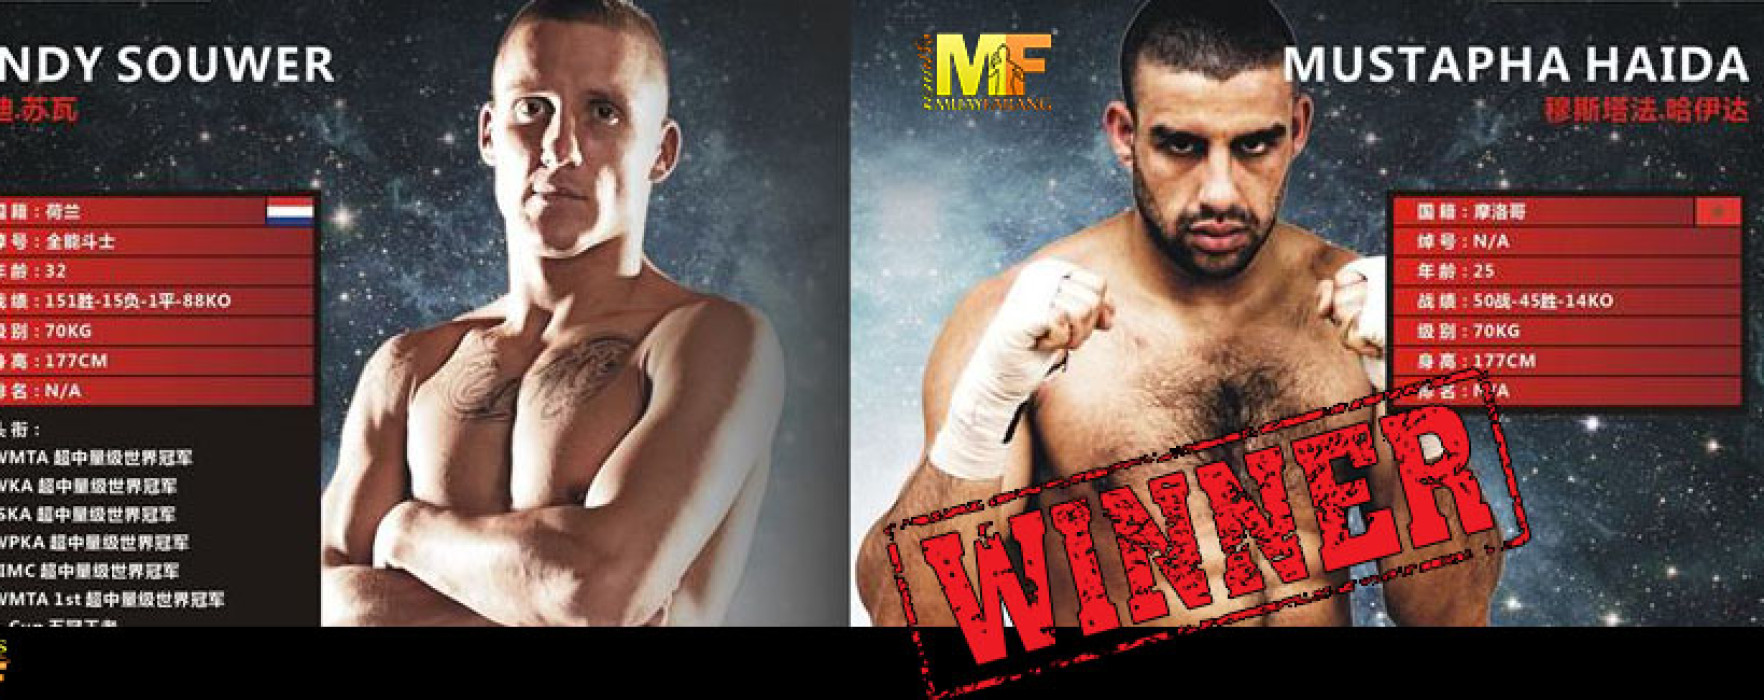 Flash News: Mustapha Haida (Fight1) promoted by Muay Farang surprised the world by beating Andy Souwer